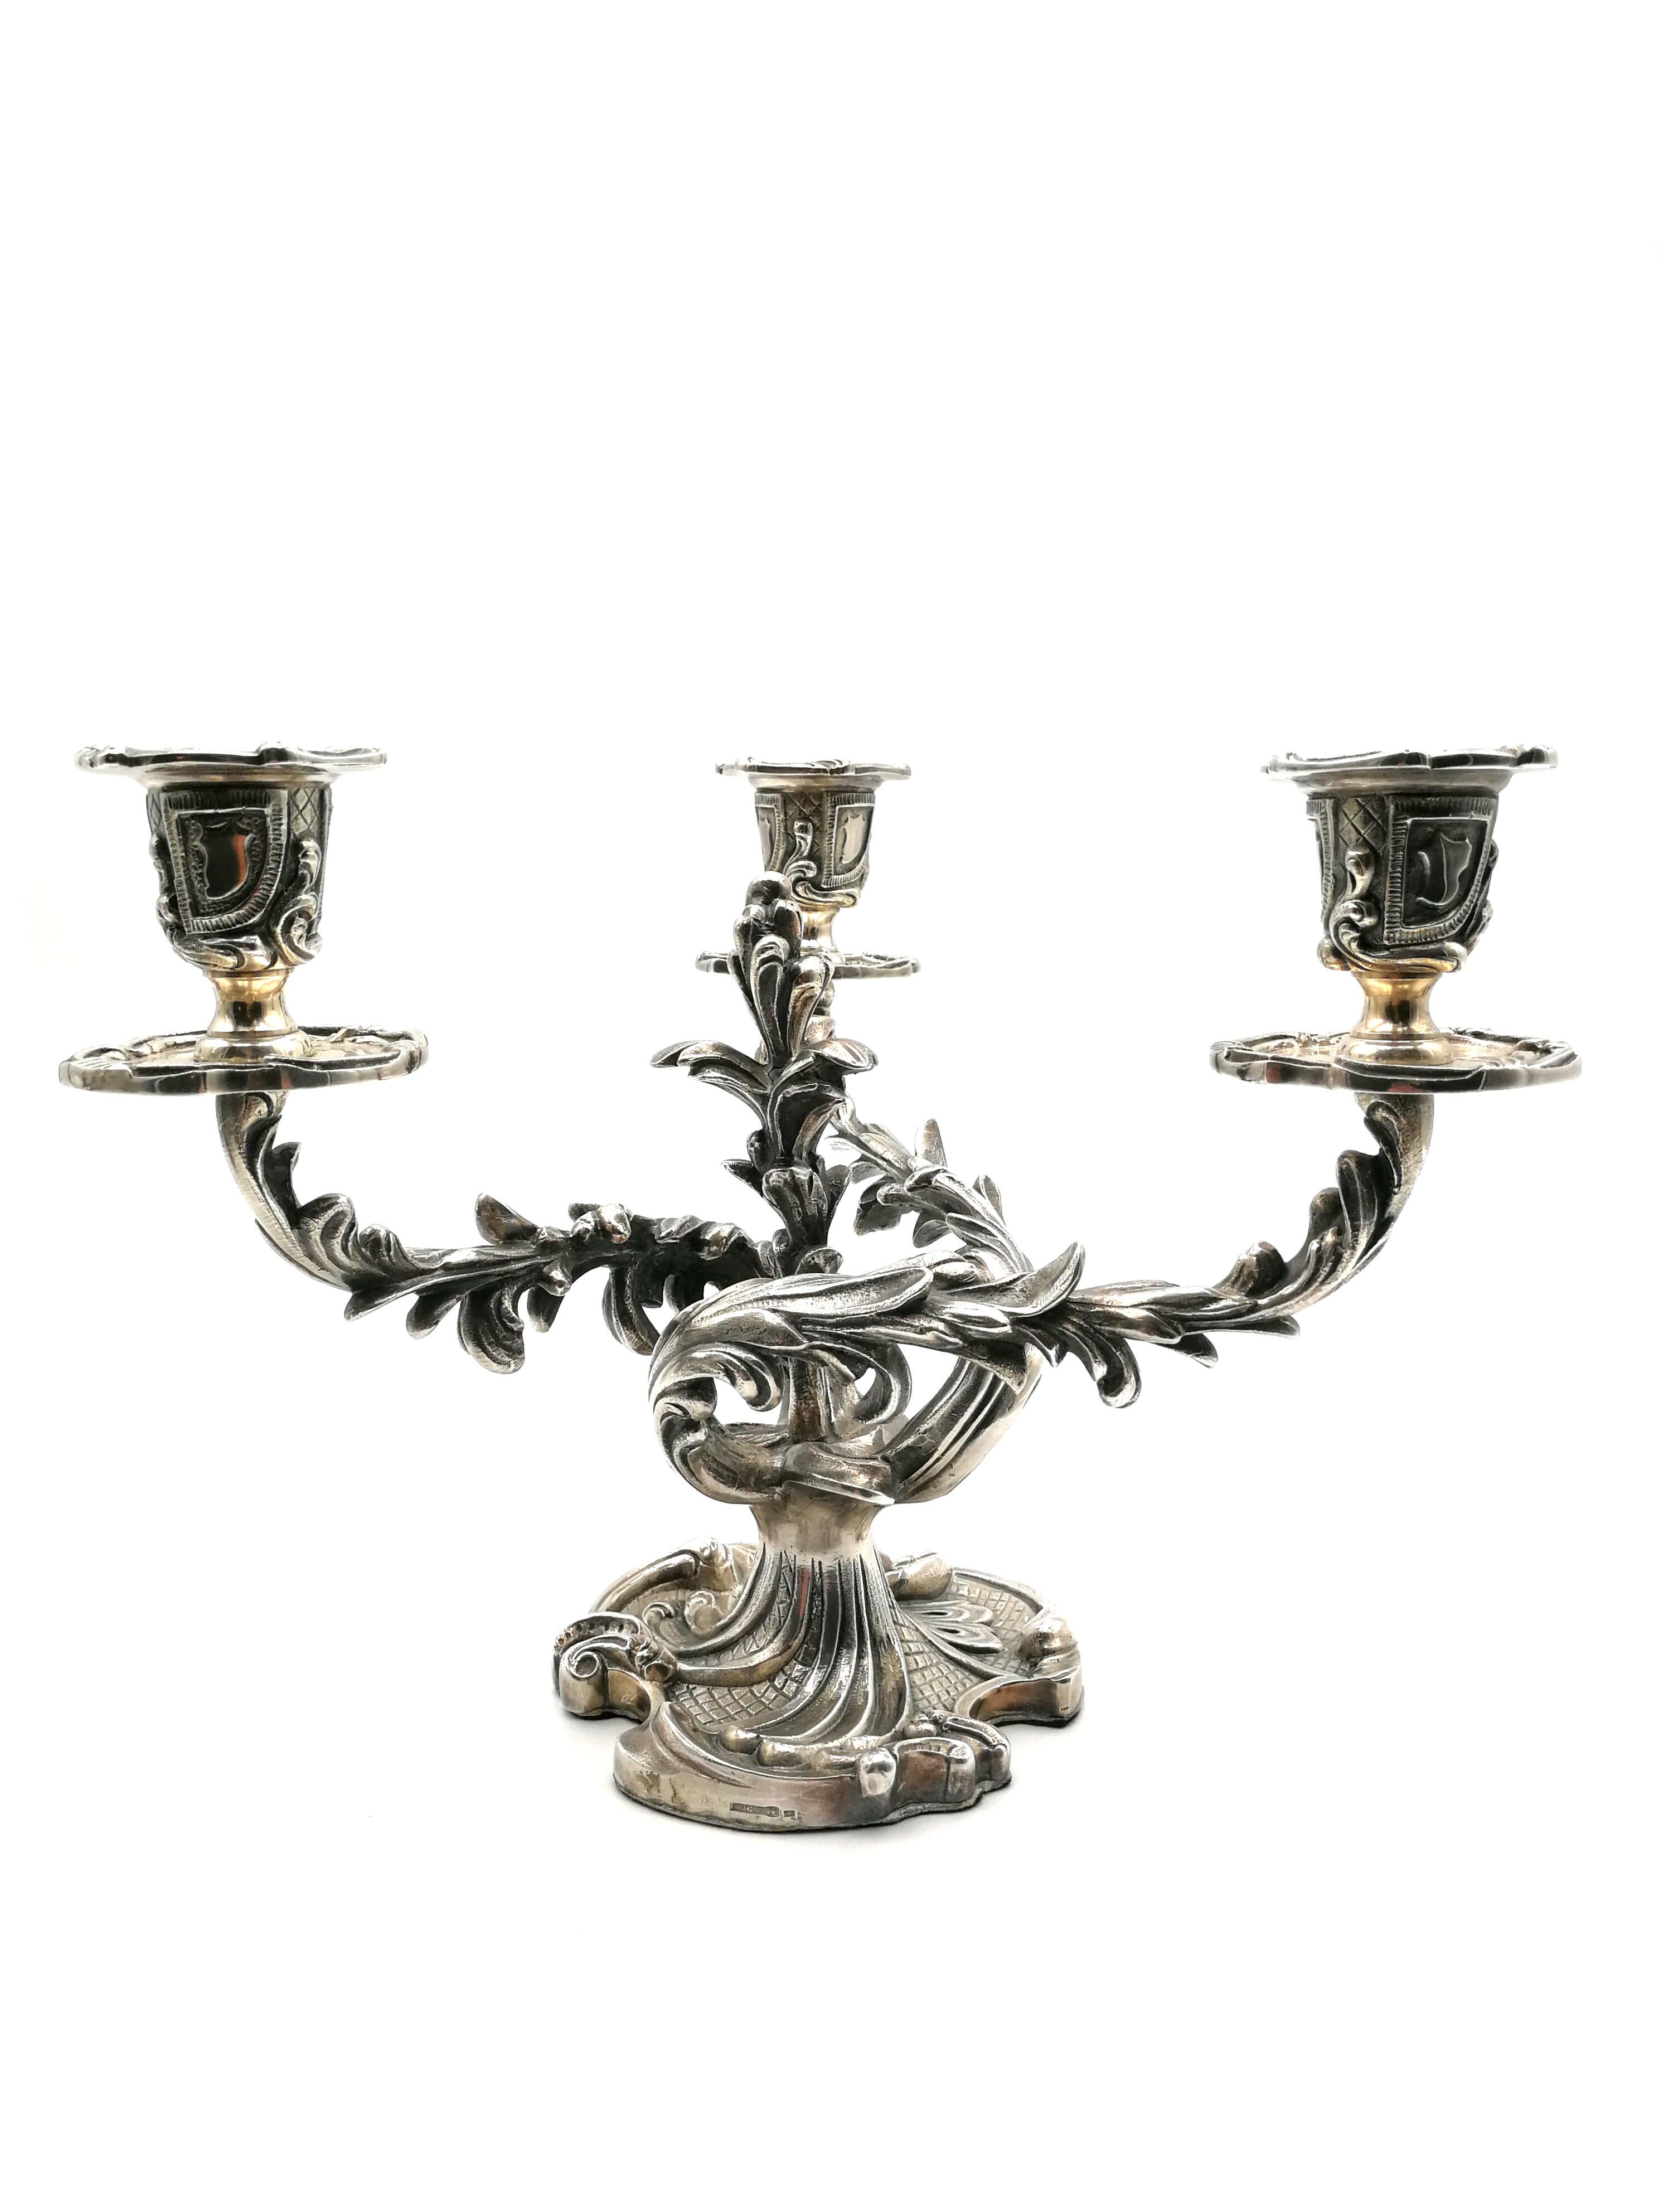 Wiskeman Pair of Rococo Silver Plated Candelabra 2